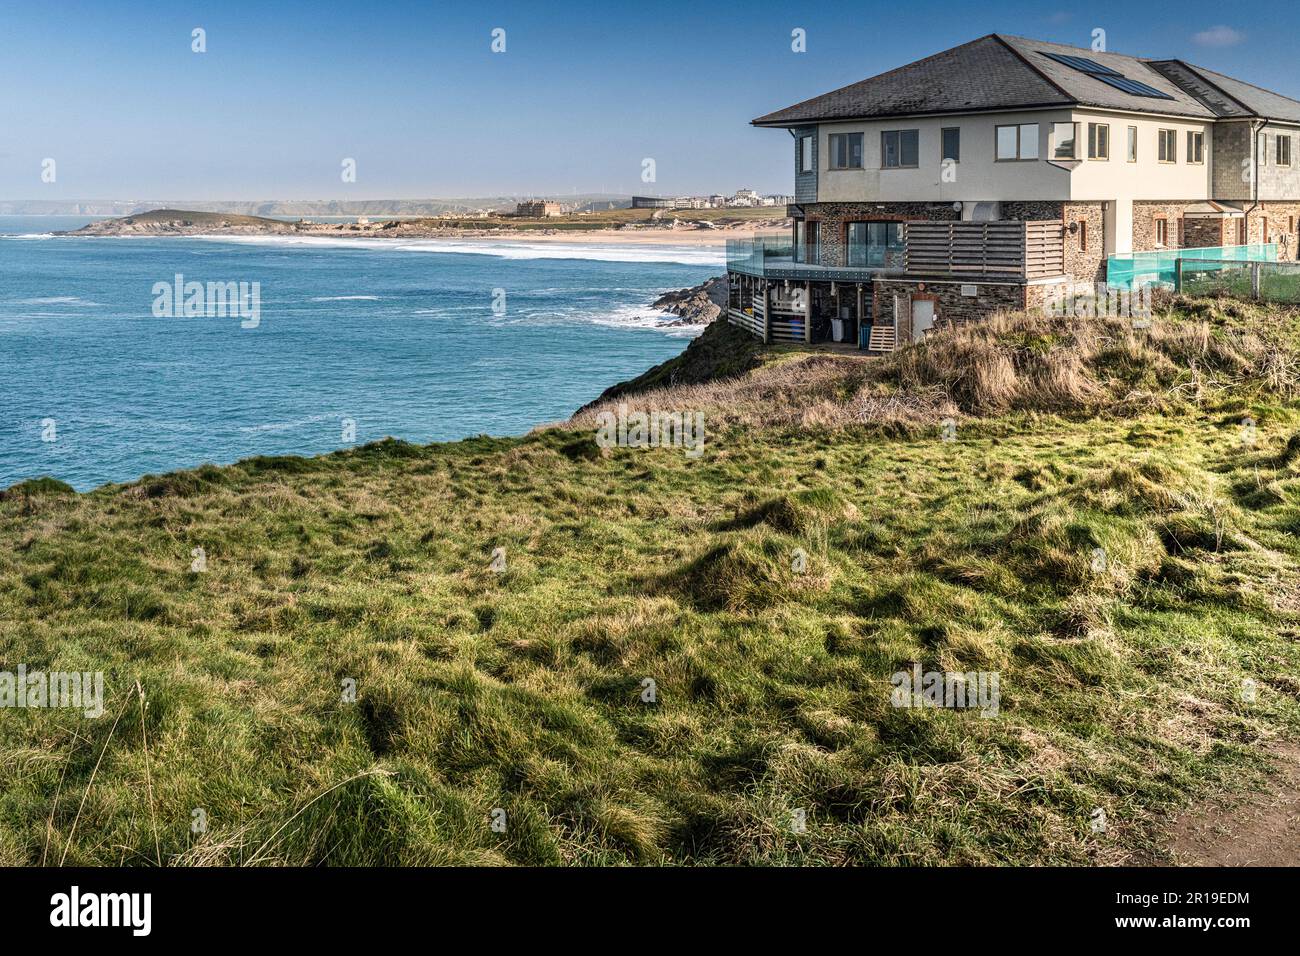 The Lewinnick Lodge restaurant and hotel overlooking Fistral Bay on the coast of Newquay in Cornwall in England in the UK. Stock Photo